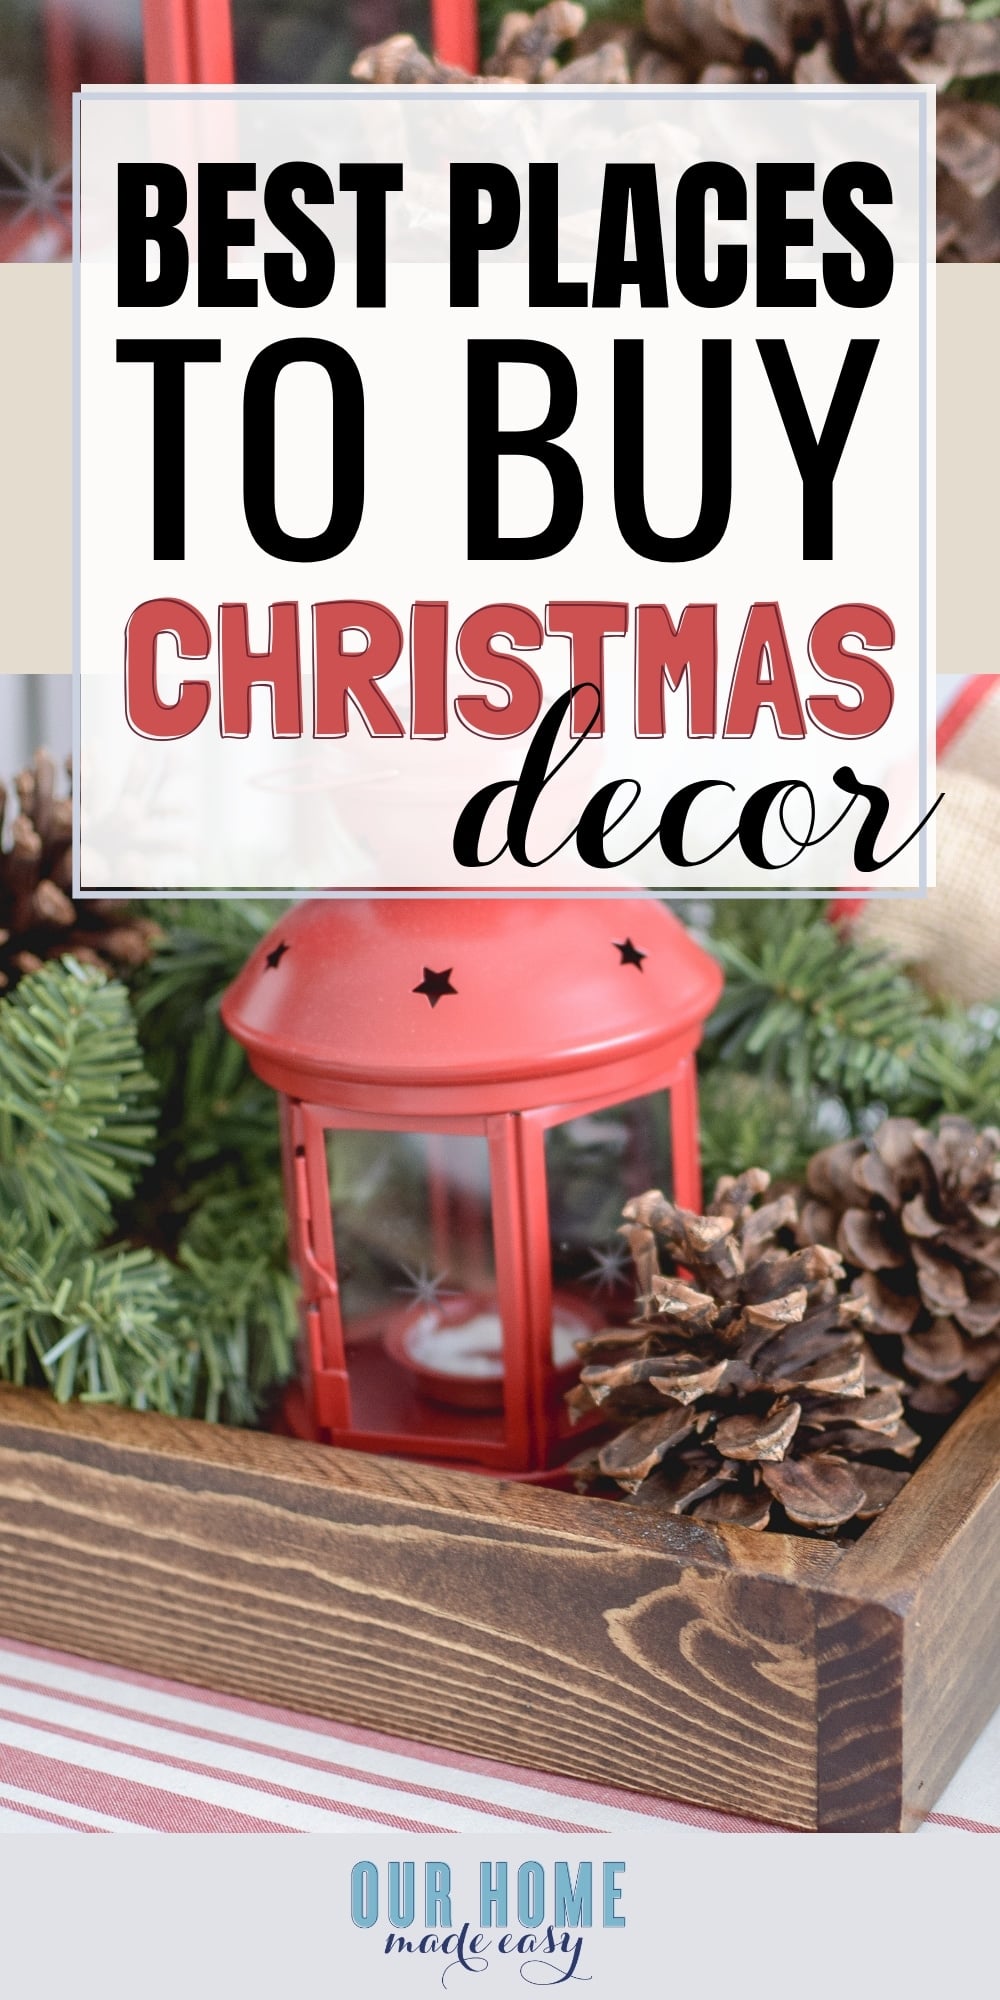 Here are the 20 best places to buy Christmas Decorations! No matter your style or budget, you'll find something that is perfect for your home easily! #christmas #homedecor #ourhomemadeeasy